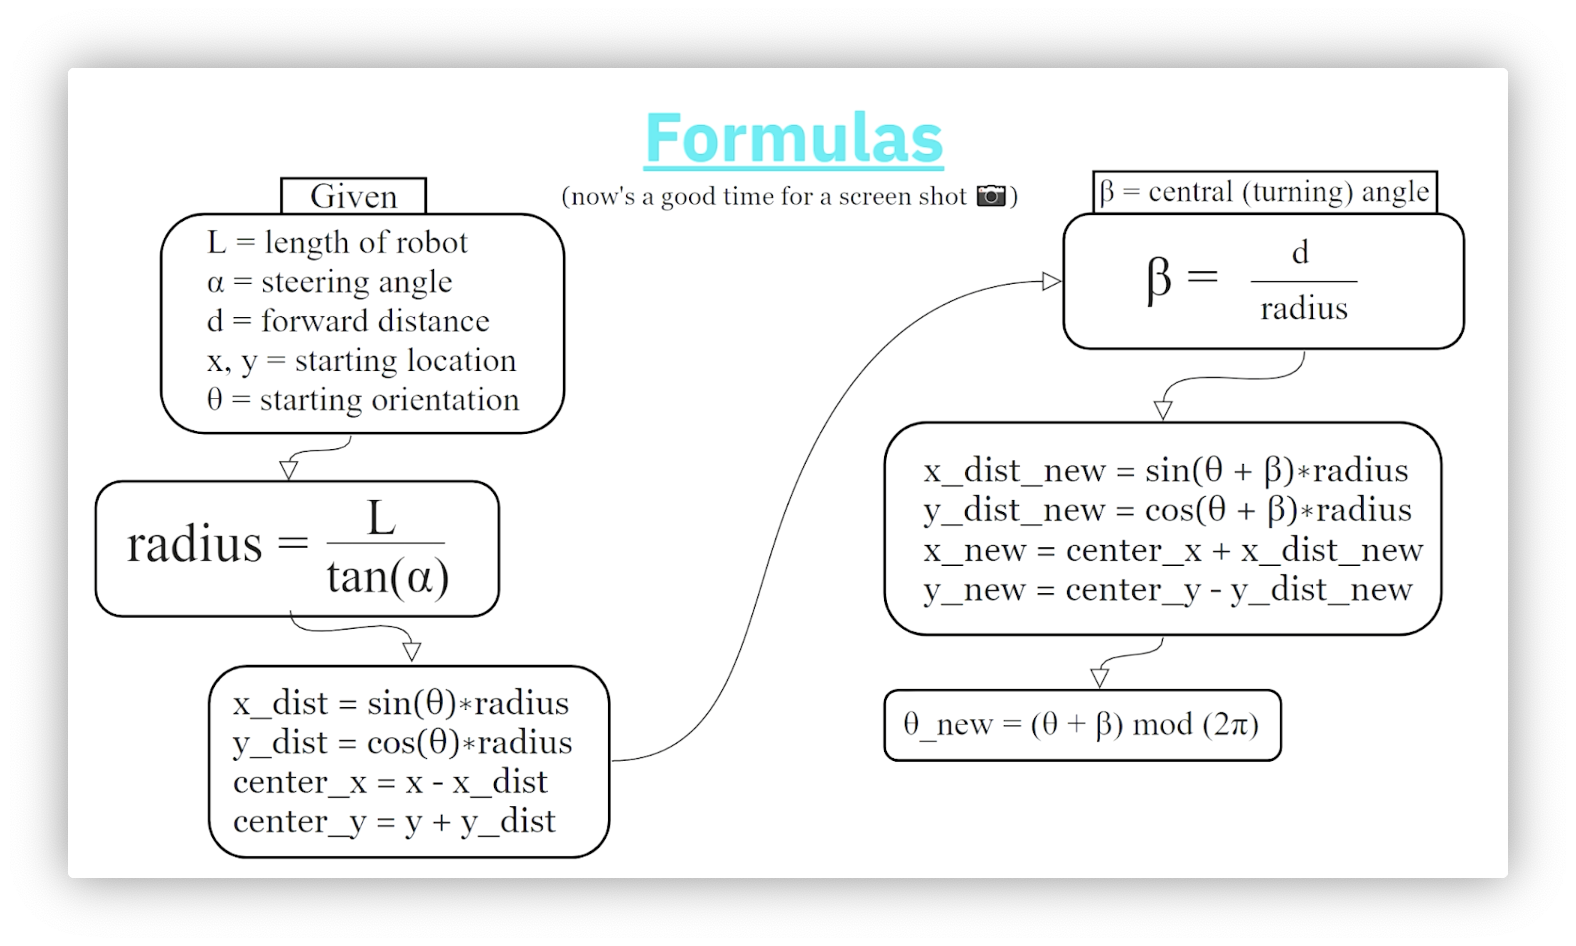 The collection of formulas needed to solve problems involving the bicycle model.